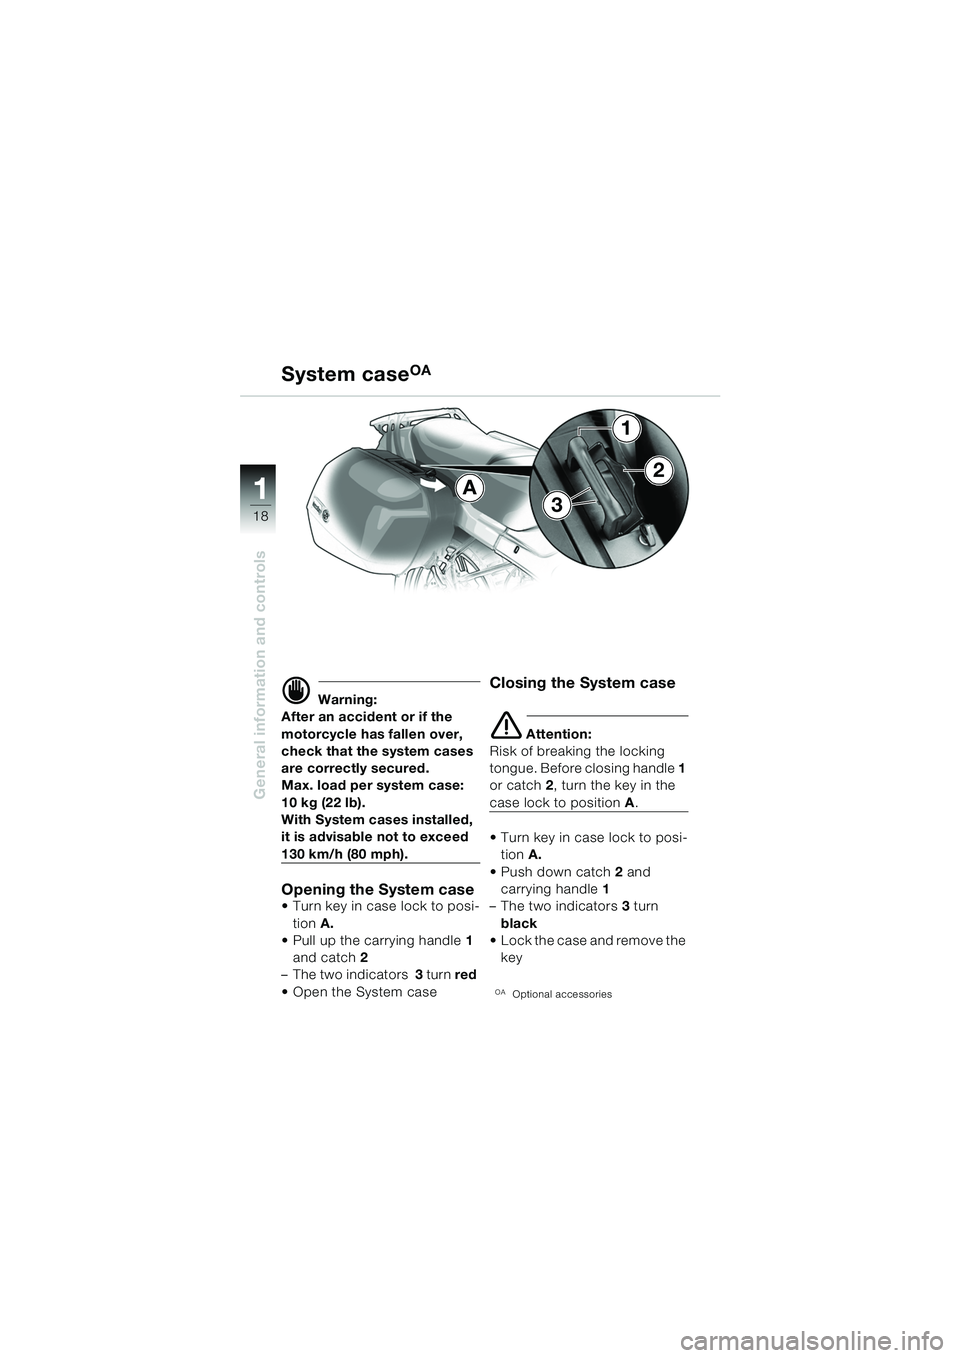 BMW MOTORRAD R 1150 RS 2002  Riders Manual (in English) 1
General information and controls
18
A
3
2
1
d Warning:
After an accident or if the 
motorcycle has fallen over, 
check that the system cases 
are correctly secured.
Max. load per system case: 
10 kg